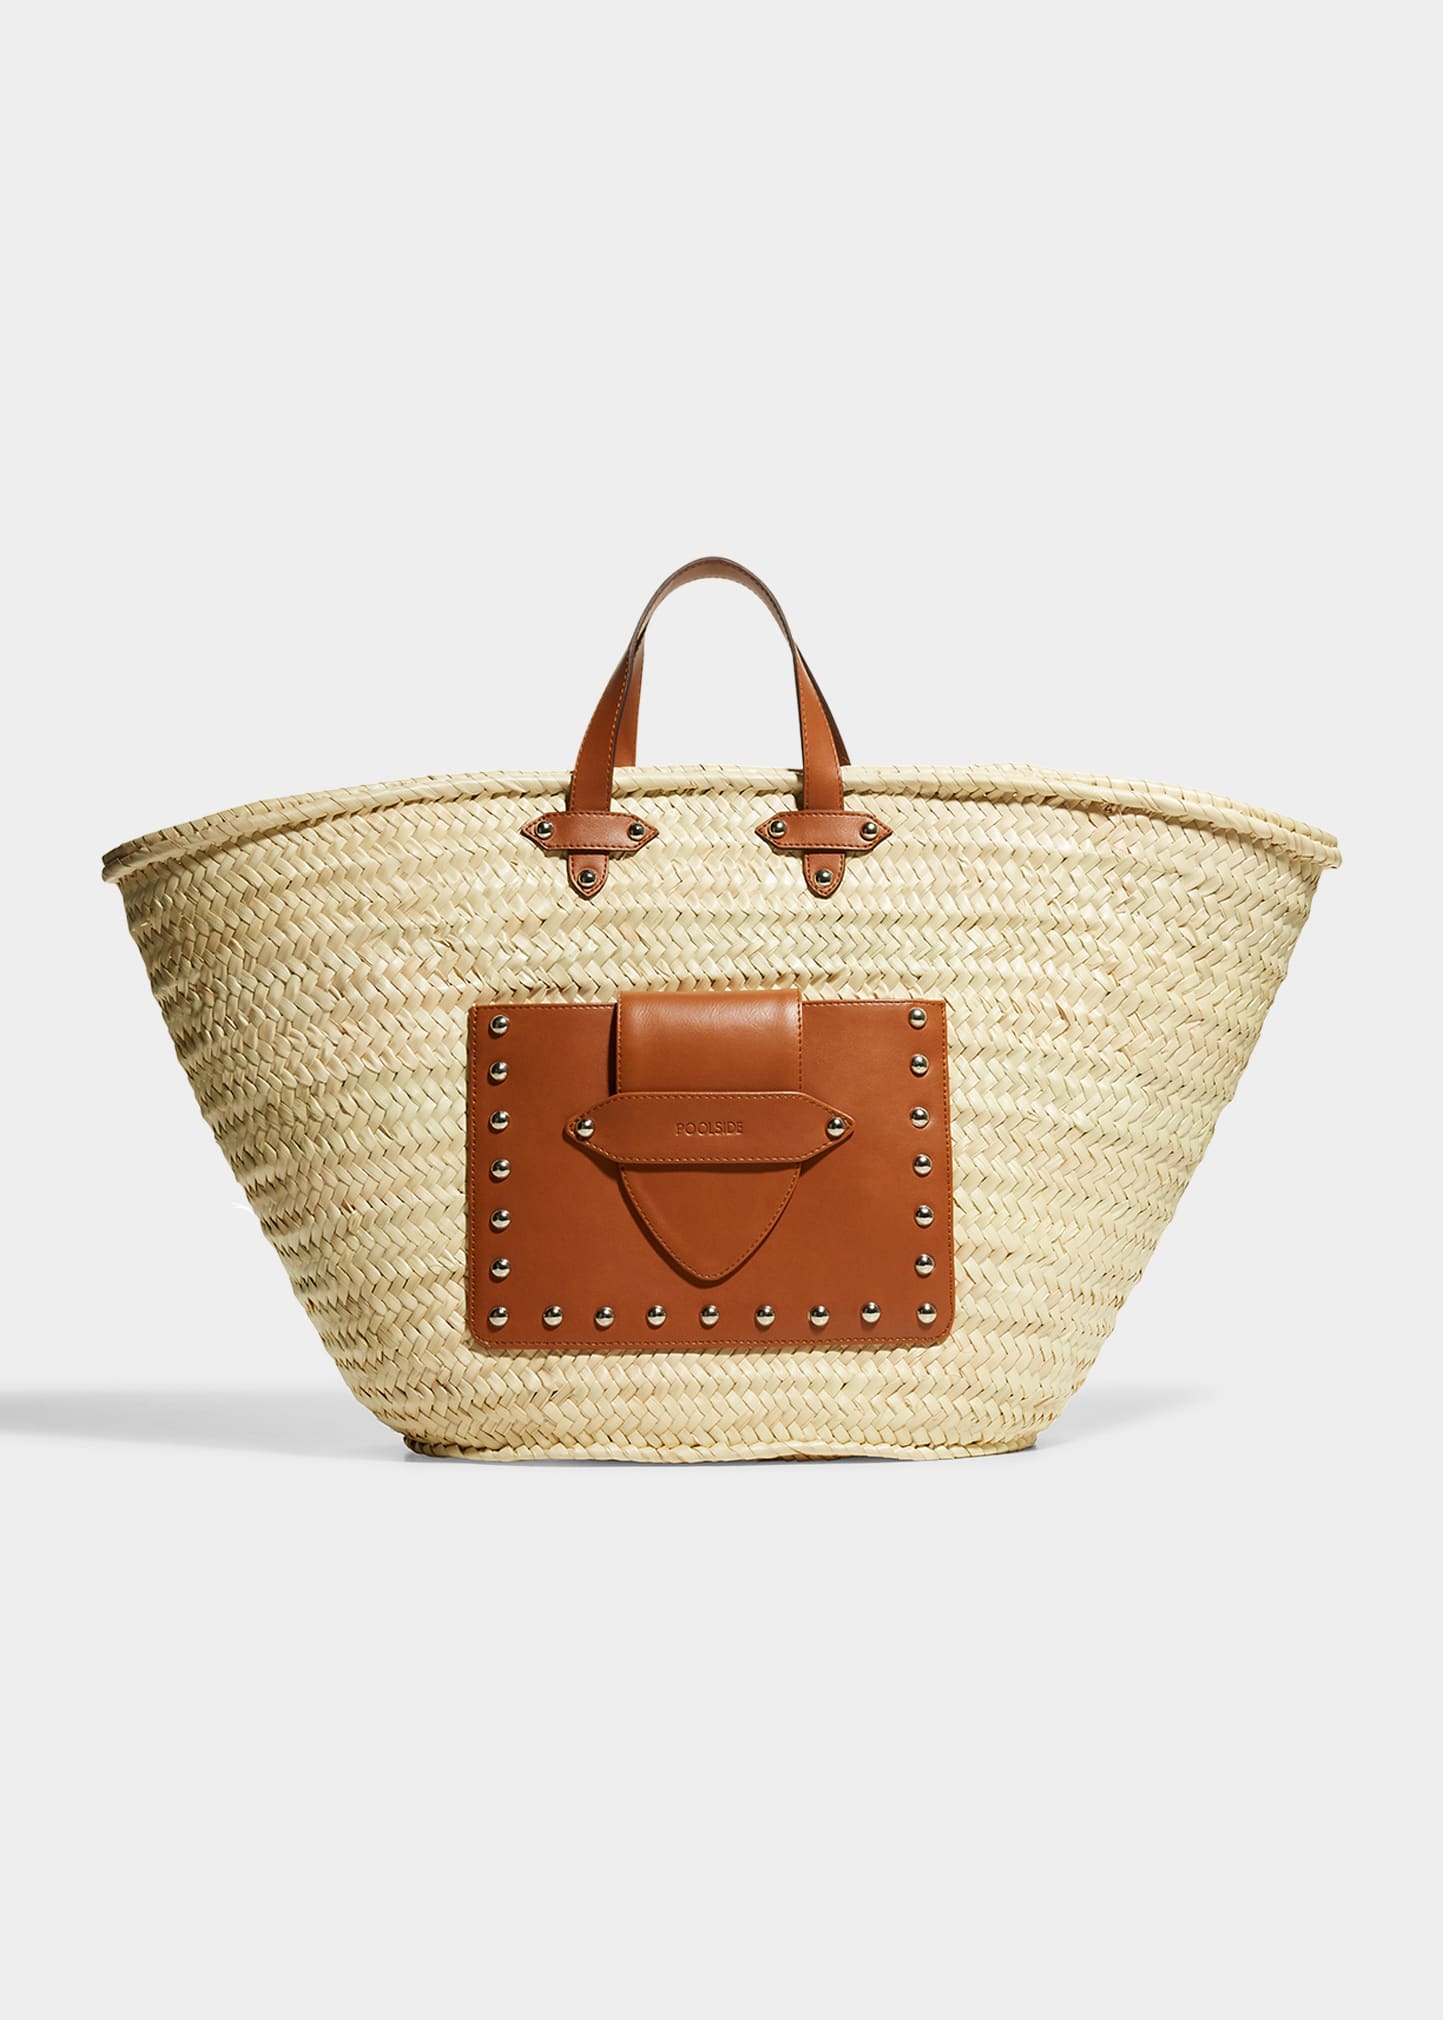 POOLSIDE LARGE STUDDED STRAW BEACH TOTE BAG